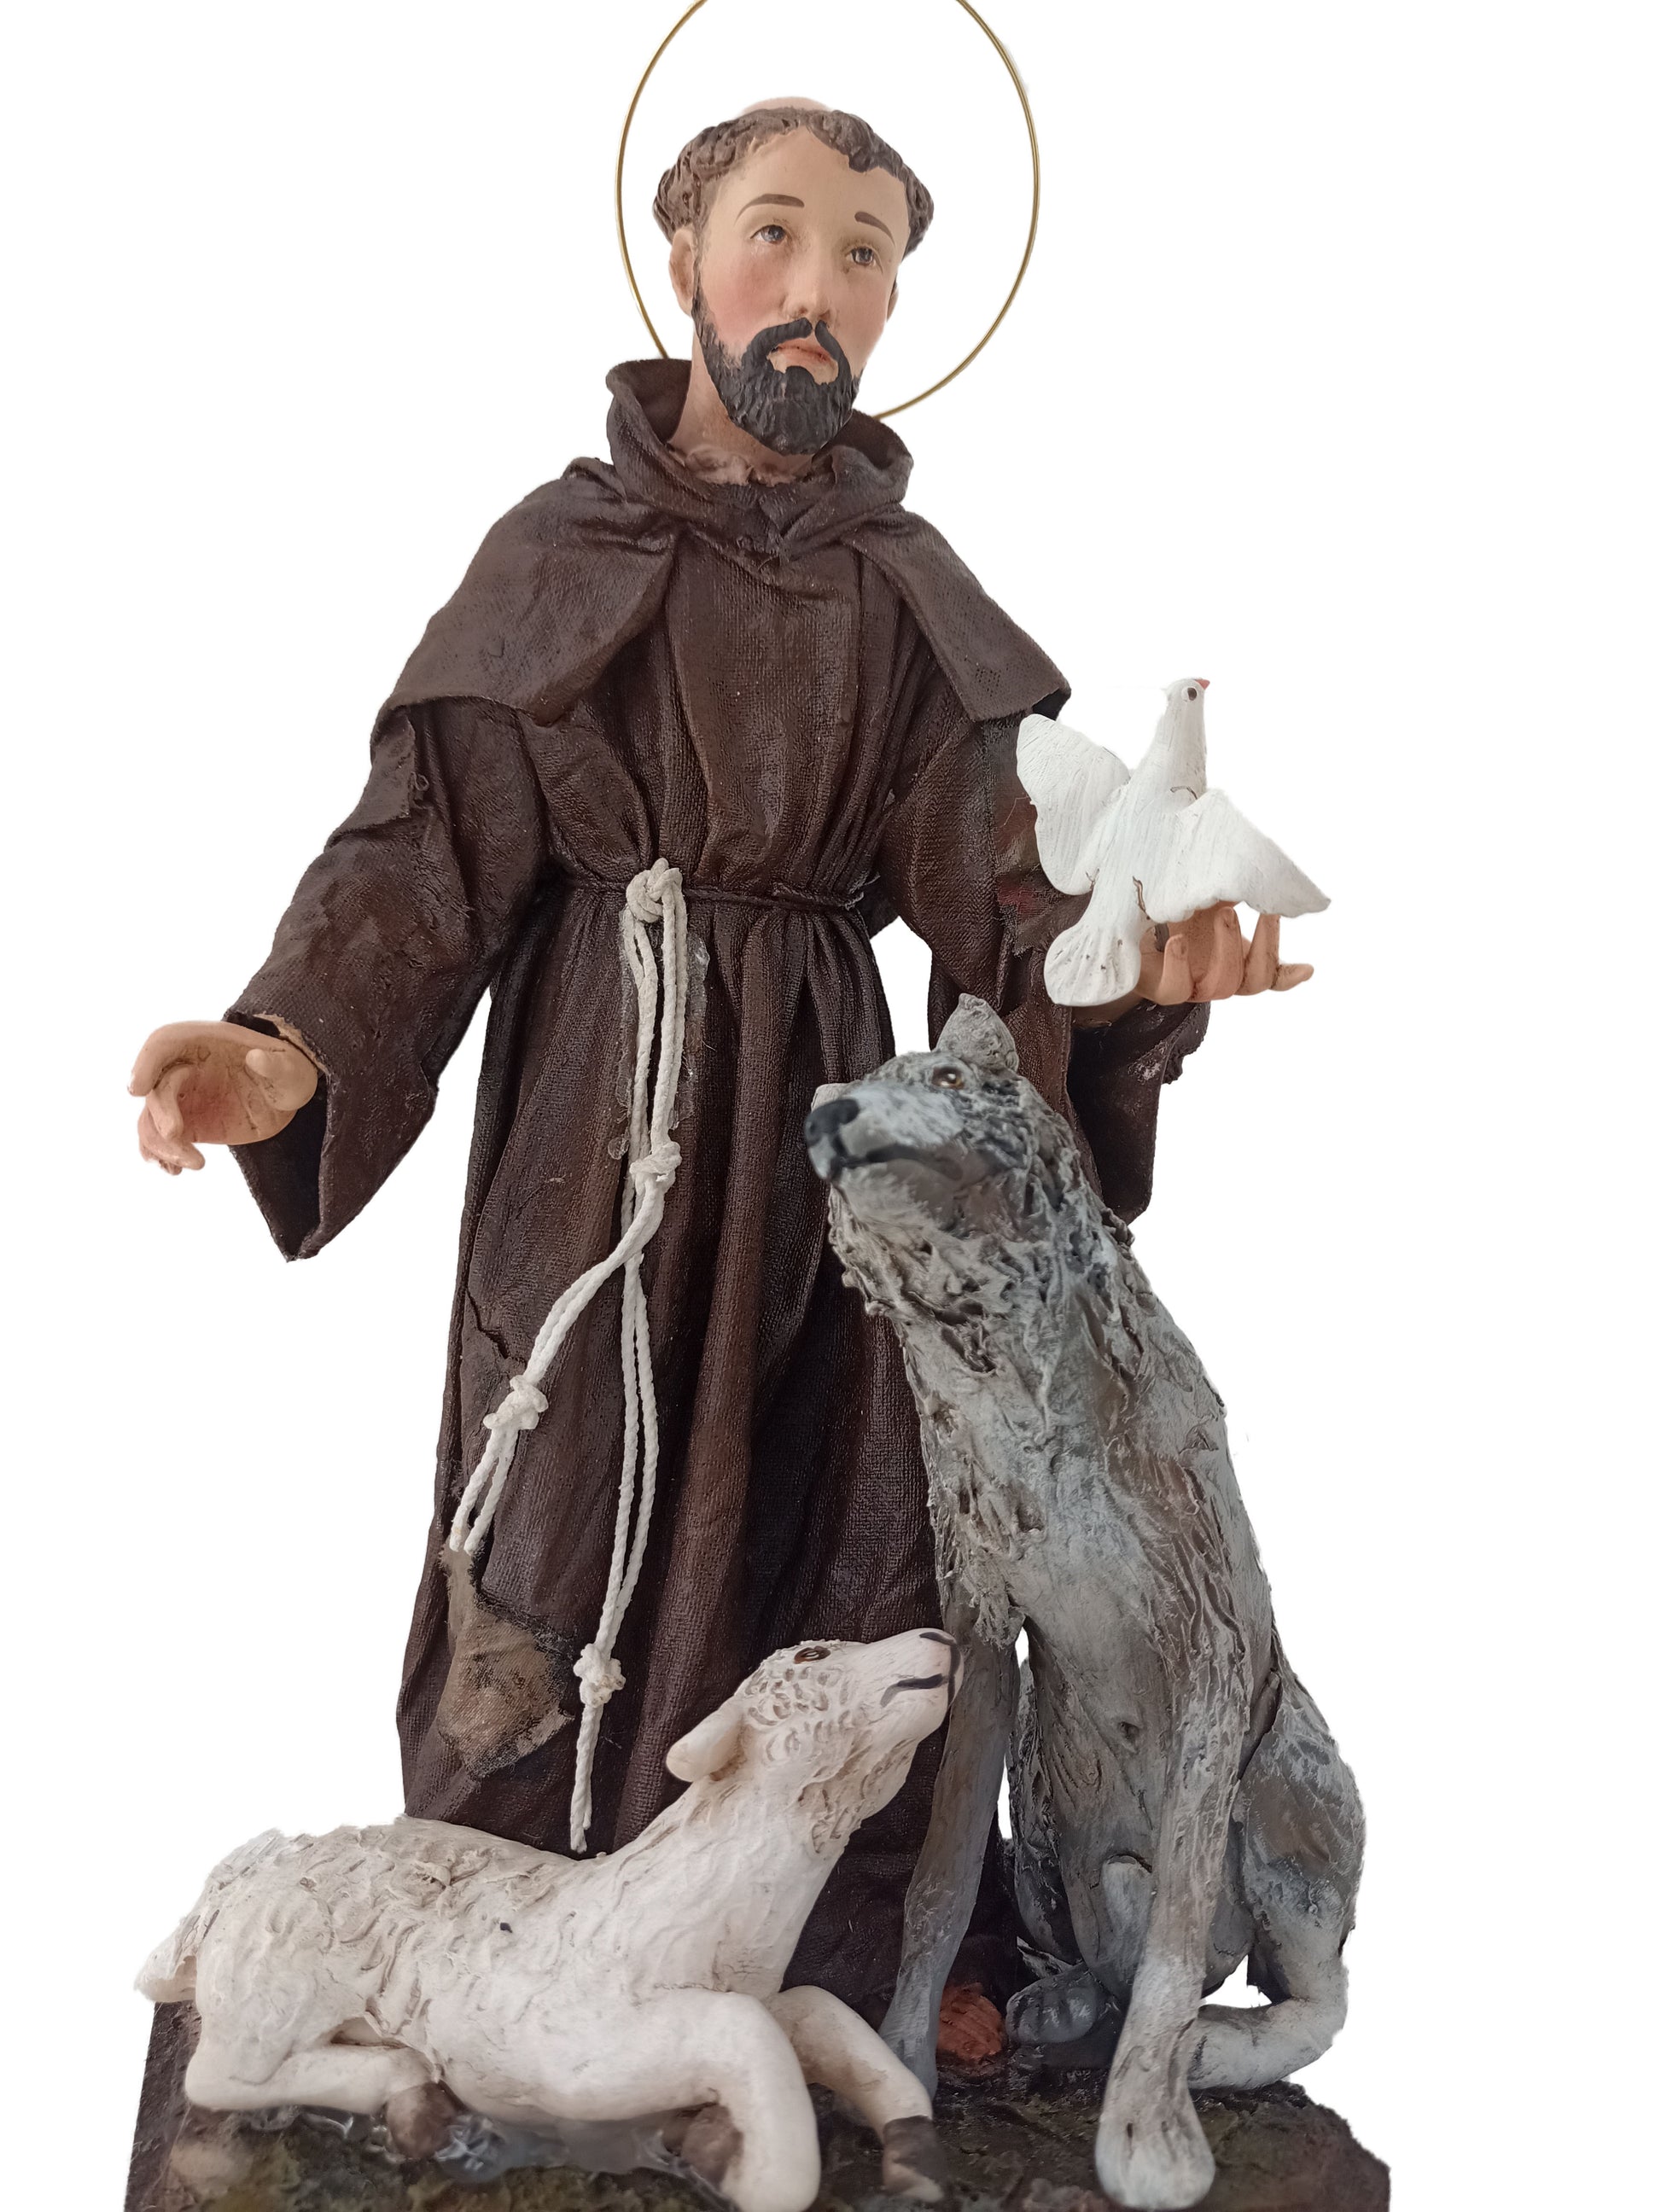 Saint Francis of Assisi house decor - Handcrafted - kmnkdeco